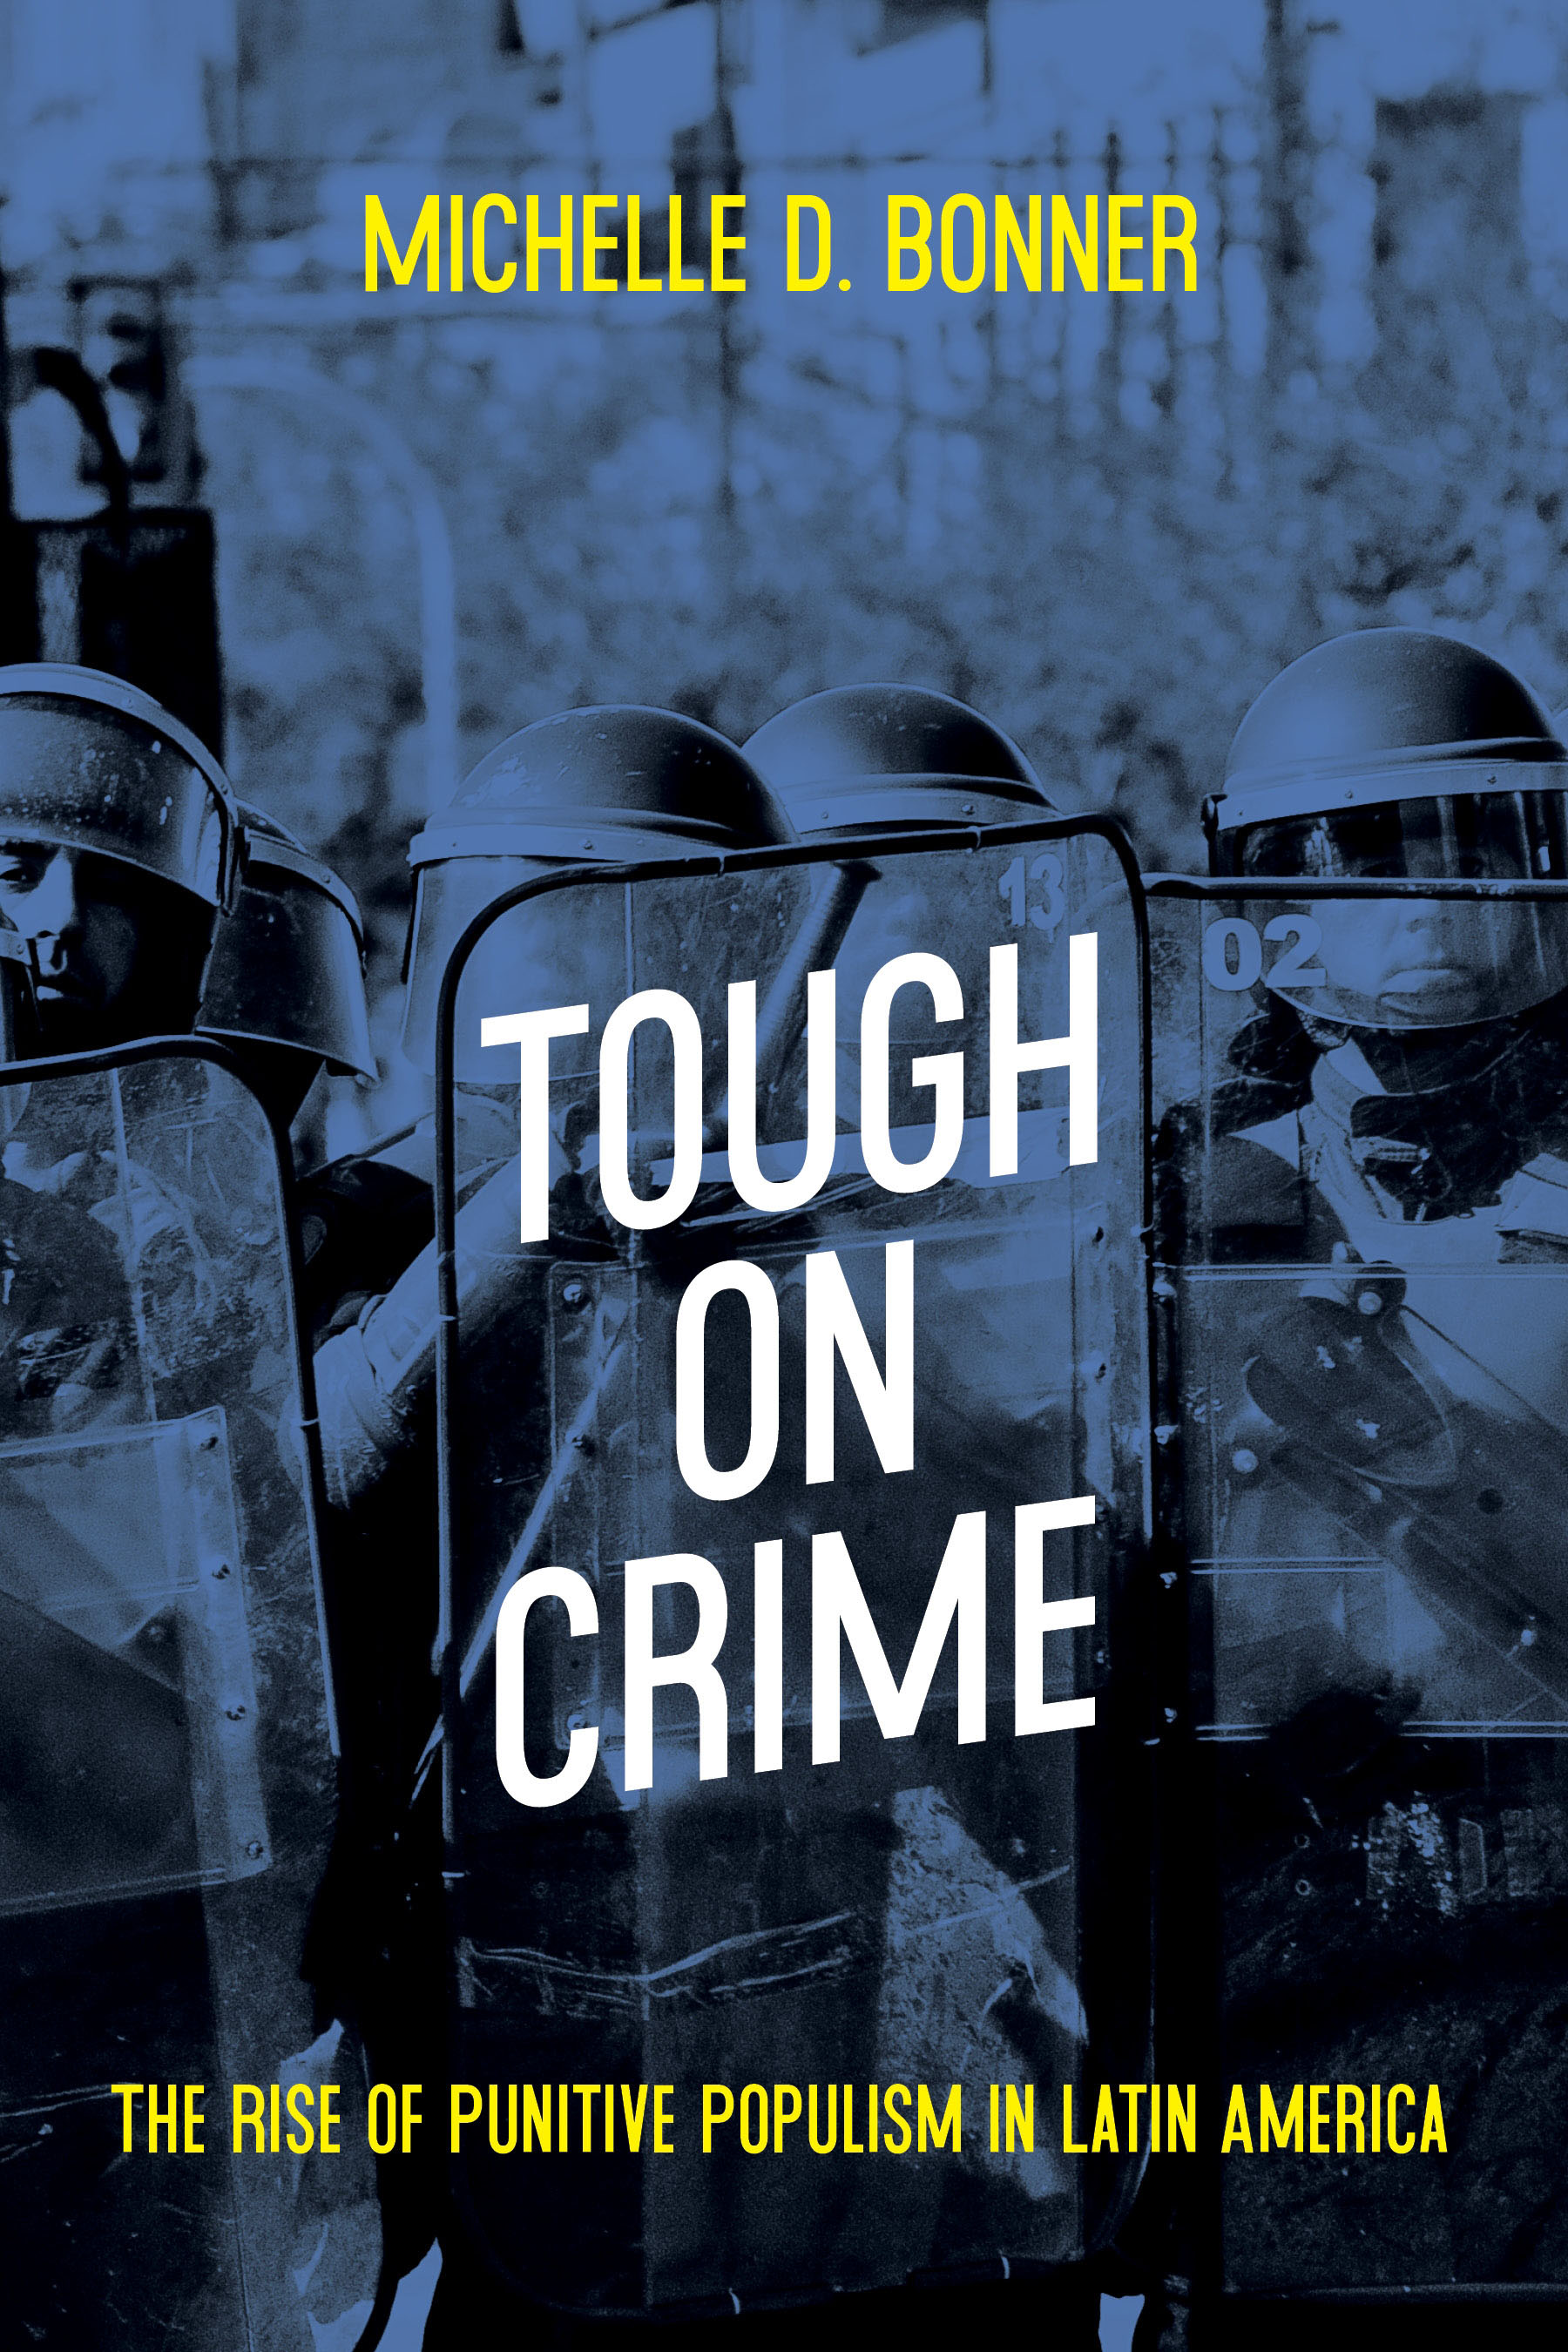 Read online Tough on Crime: The Rise of Punitive Populism in Latin America - Michelle D. Bonner | PDF